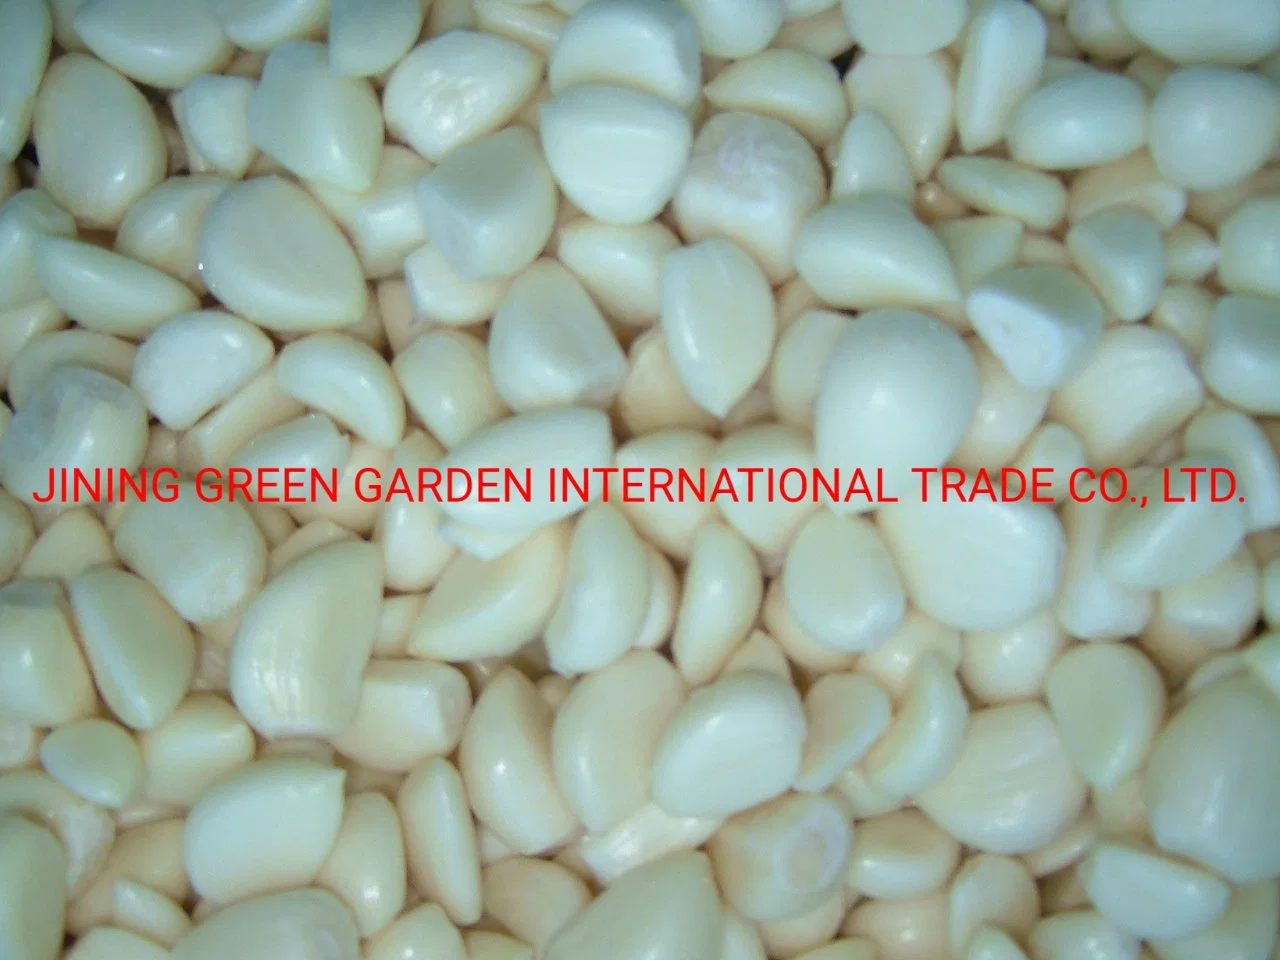 Frozen IQF Fresh Peeled Garlic Cloves with Best Price for Wholesale From China Supplier